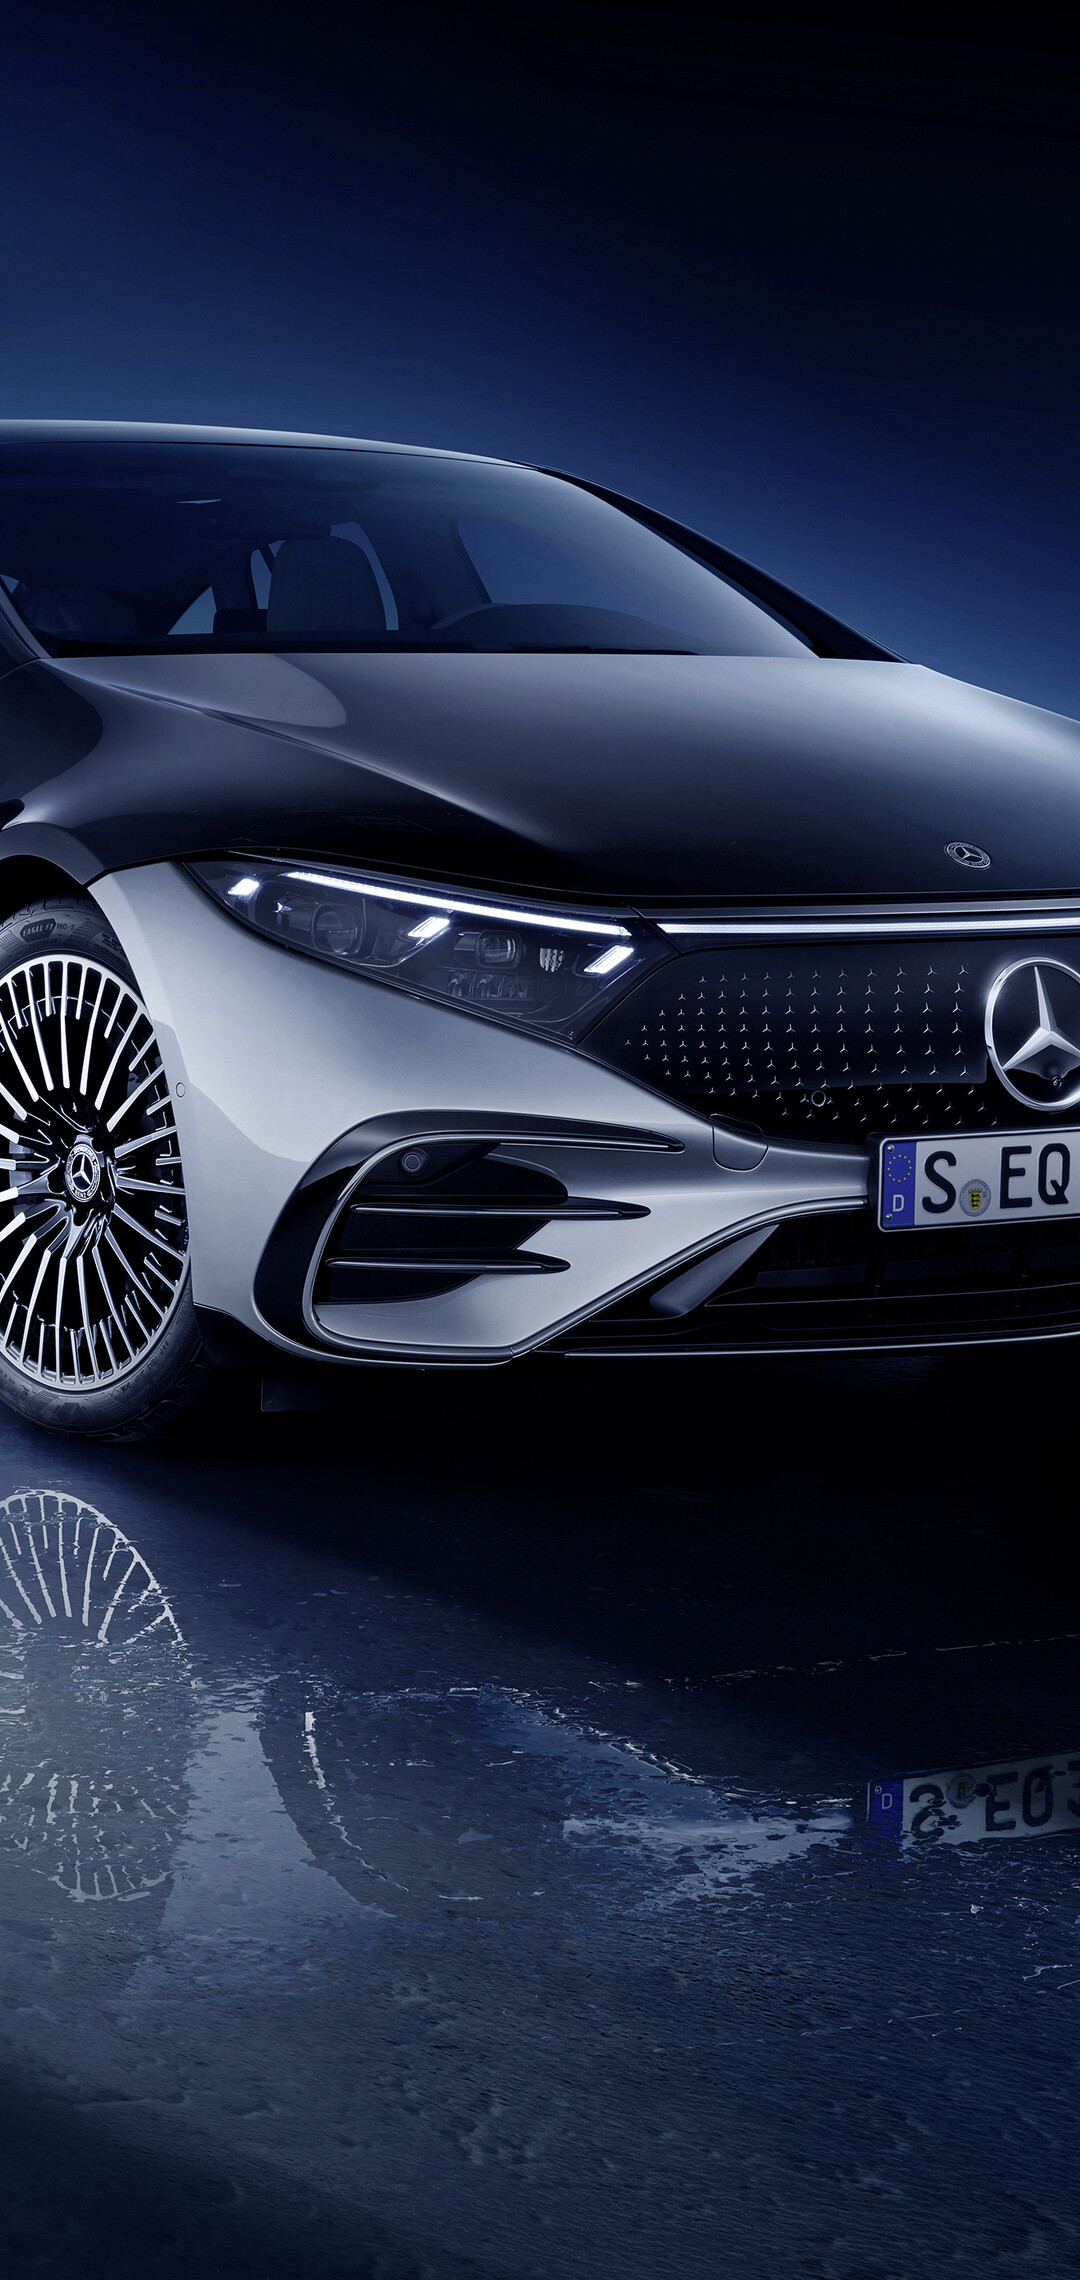 Mercedes-Benz EQS: 580 4matic AMG Line, All-electric version of the S-Class. 1080x2280 HD Wallpaper.